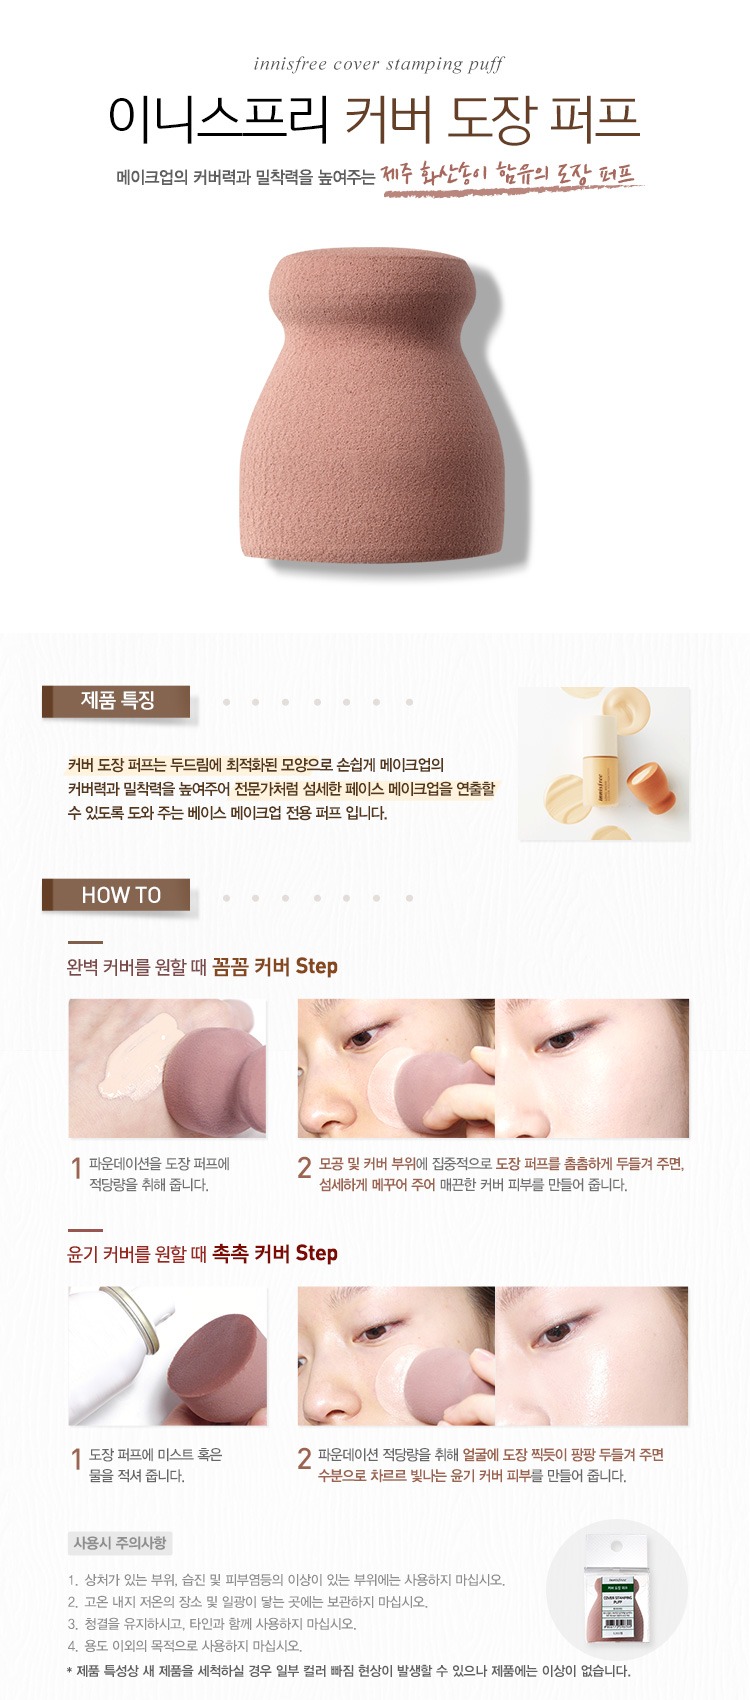 INNISFREE COVER STAMPING PUFF